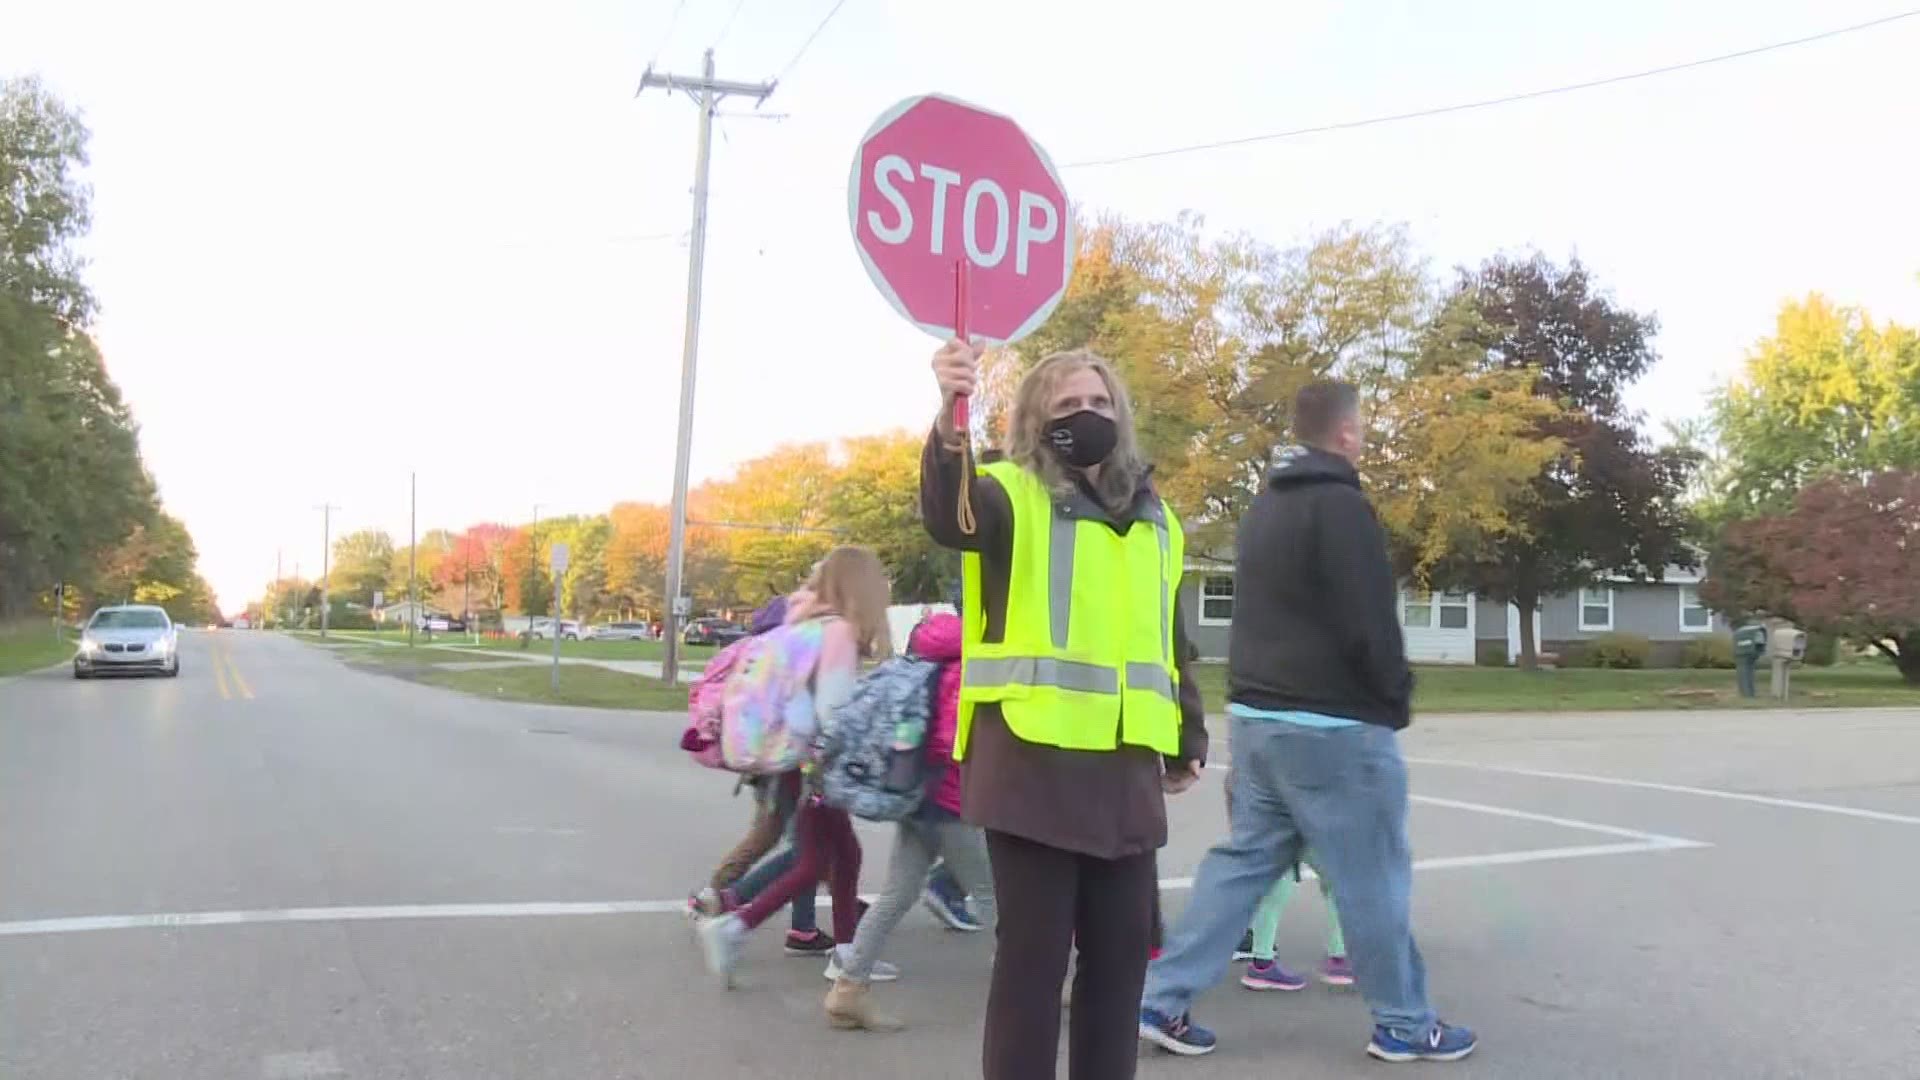 Susan Brisboe started as a crossing guard for West Ottawa's Woodside Elementary School in 1984. She retired after 36 years of leading little ones to safety.